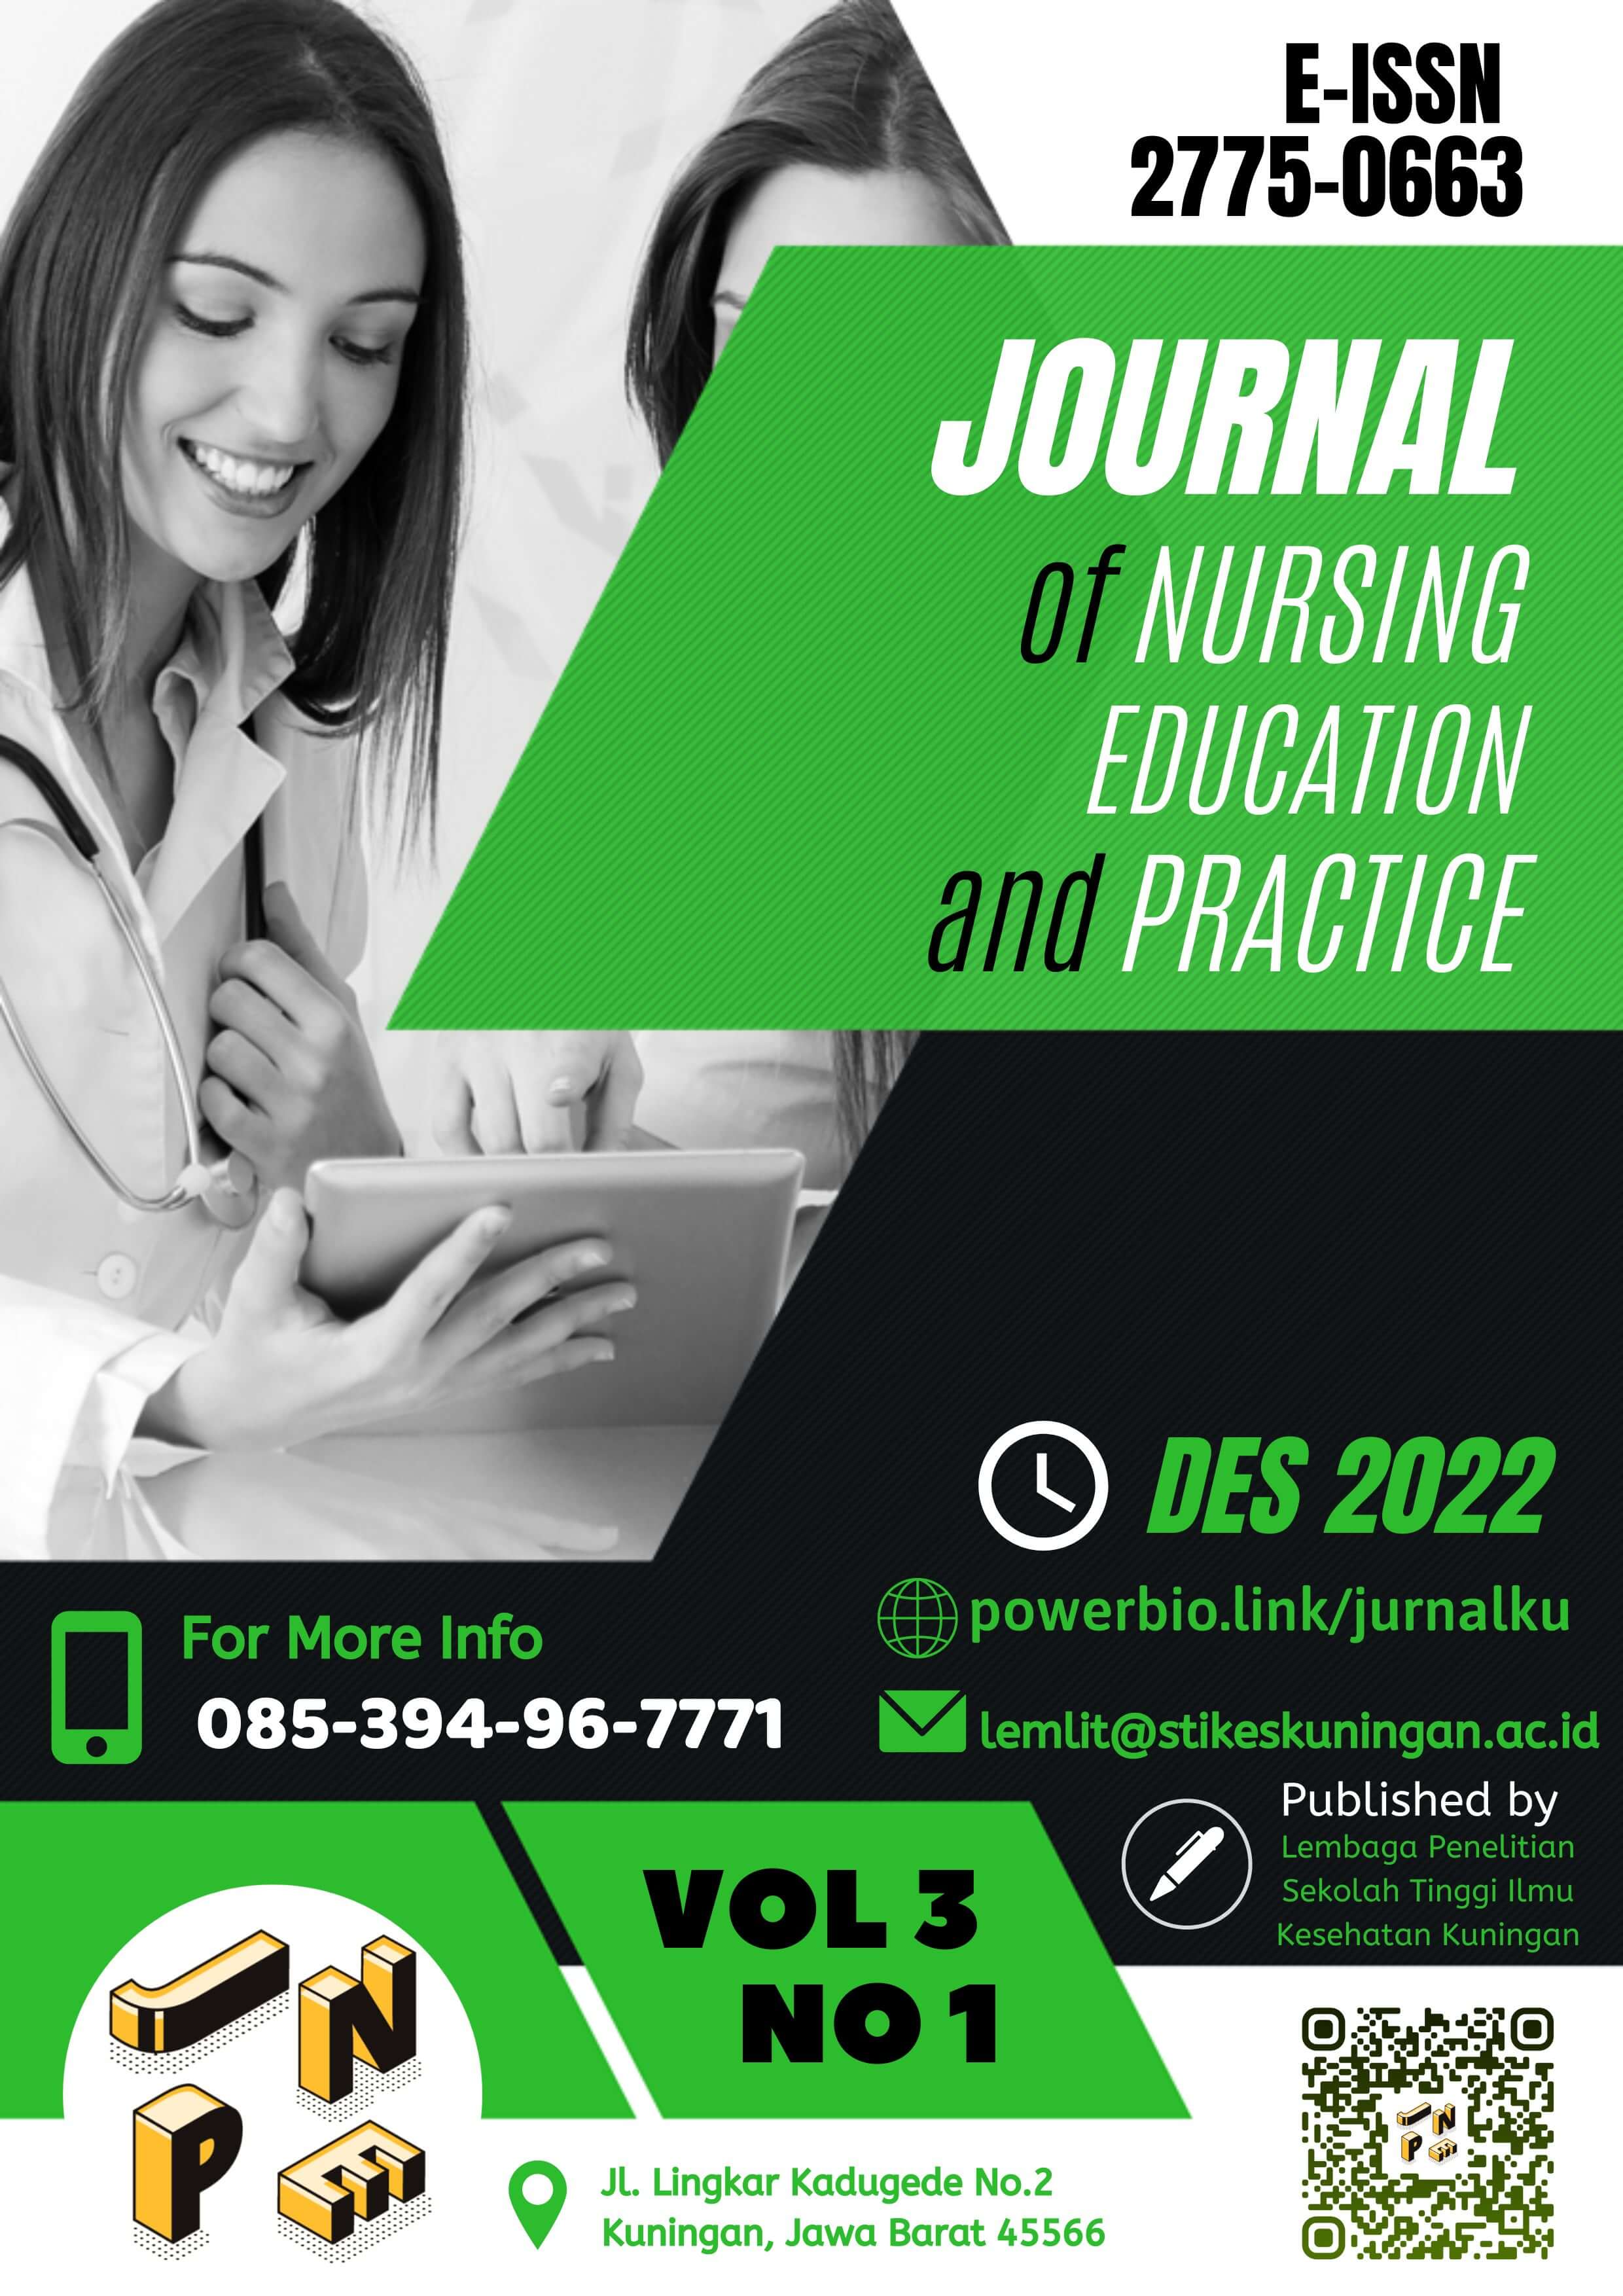 					View Vol. 3 No. 01 (2022): Journal of Nursing Practice and Education
				